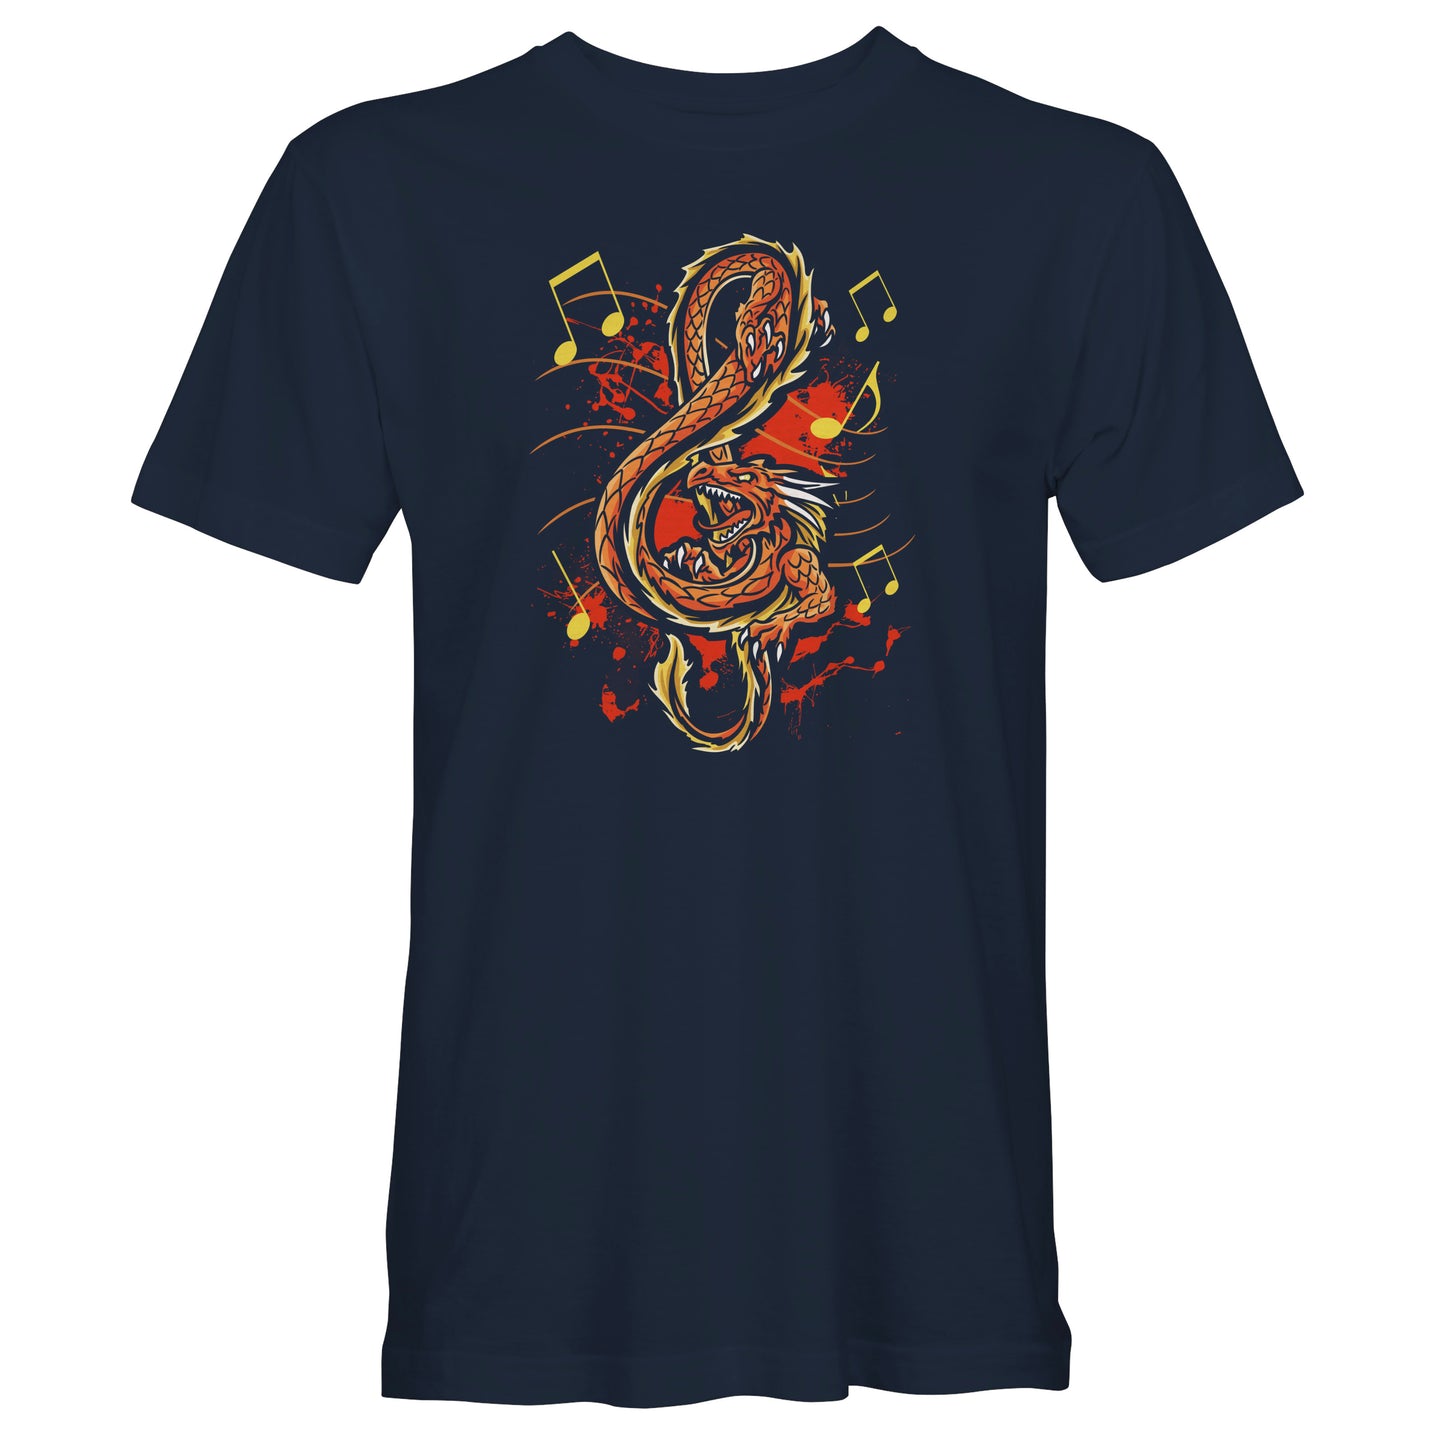 Treble Clef Dragon T-Shirt - Fire Dragon Musical G Clef Symbol Unisex Tee Shirt - For A Musician that Plays or Writes Music